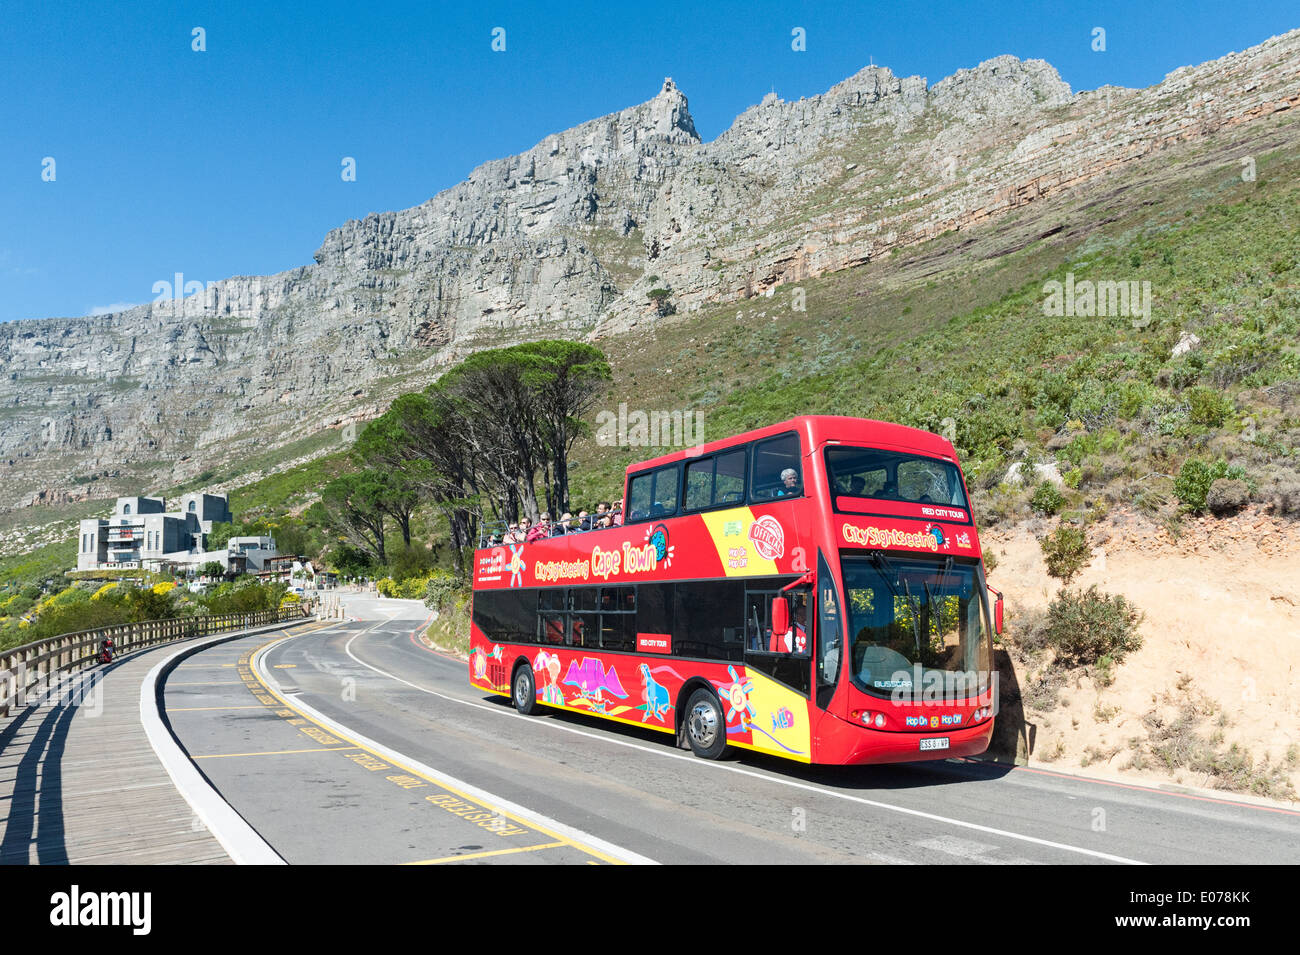 Sightseeing bus with both Cableway stations and Table Mountain in the background, Cape Town, South Africa Stock Photo